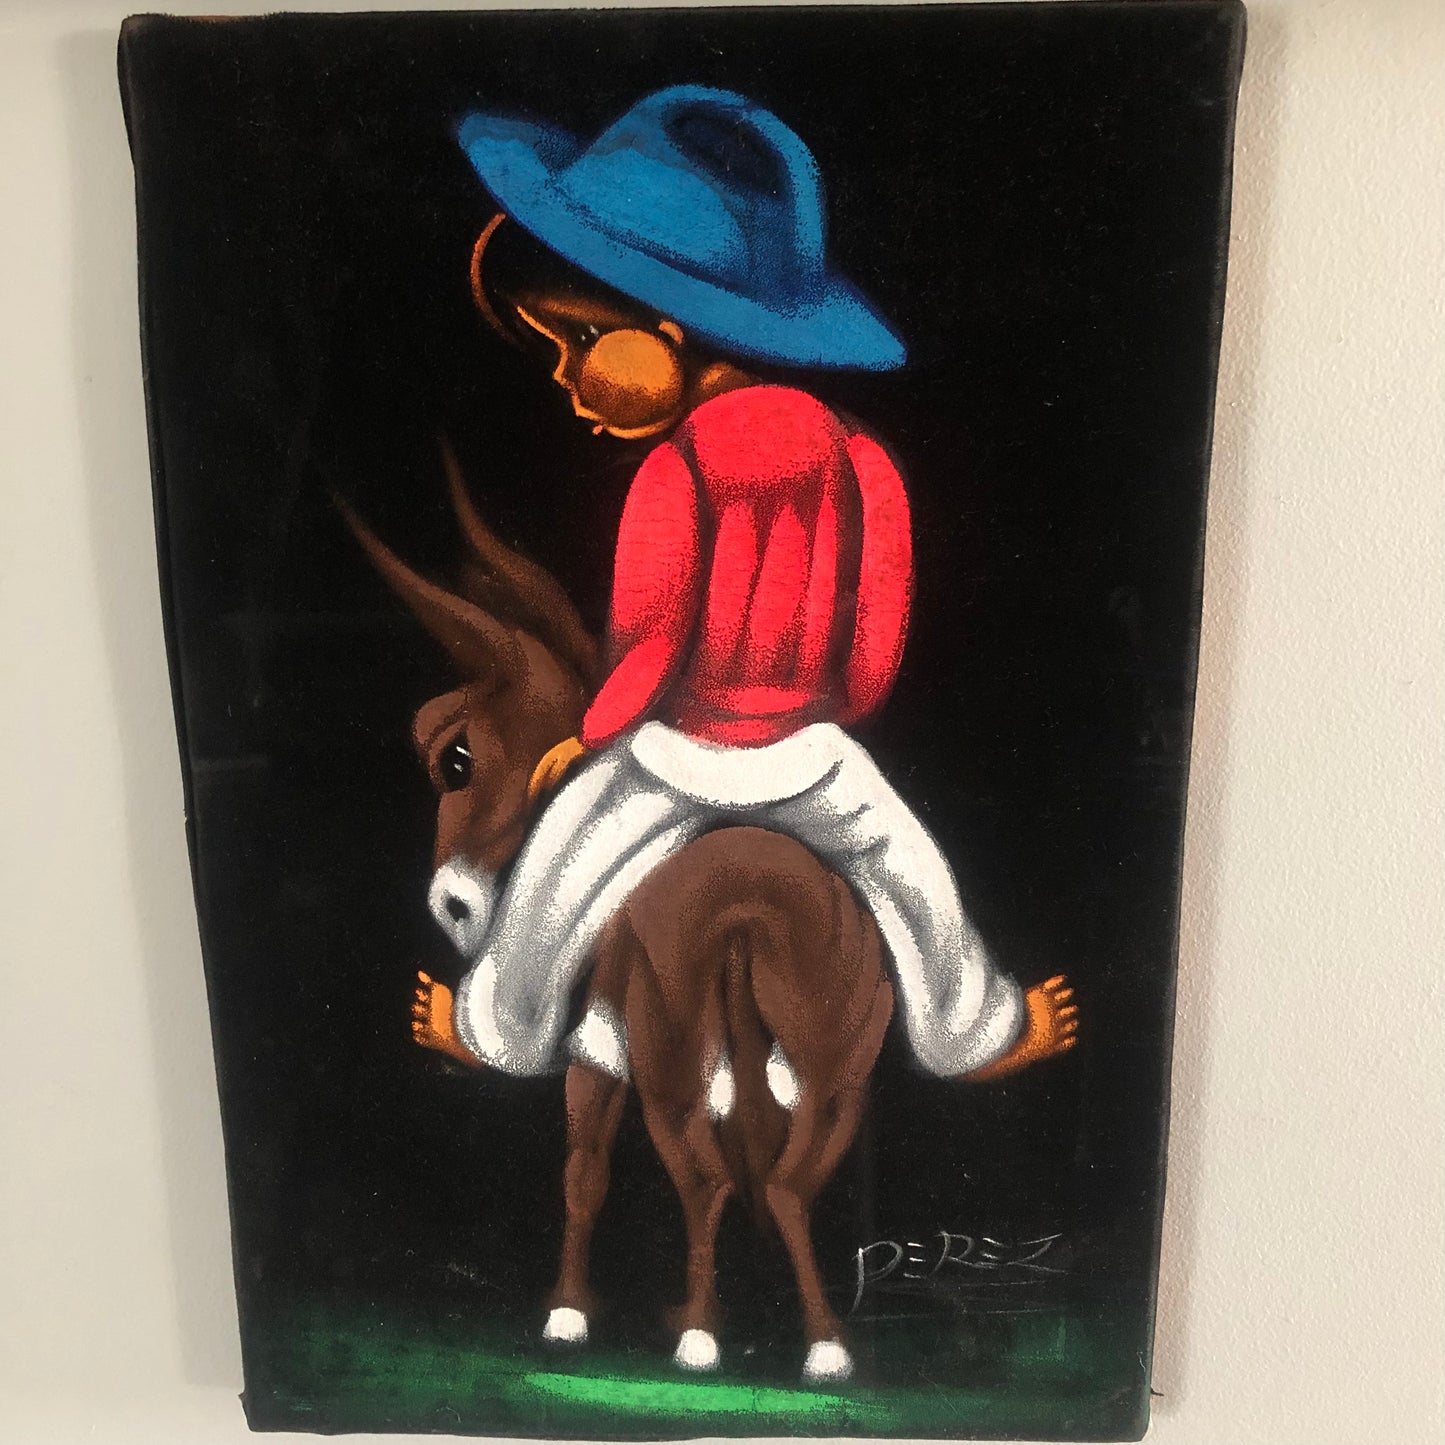 70’s Vintage Black Velvet Painting of Mexican Boy Riding Burro Unframed | by Perez